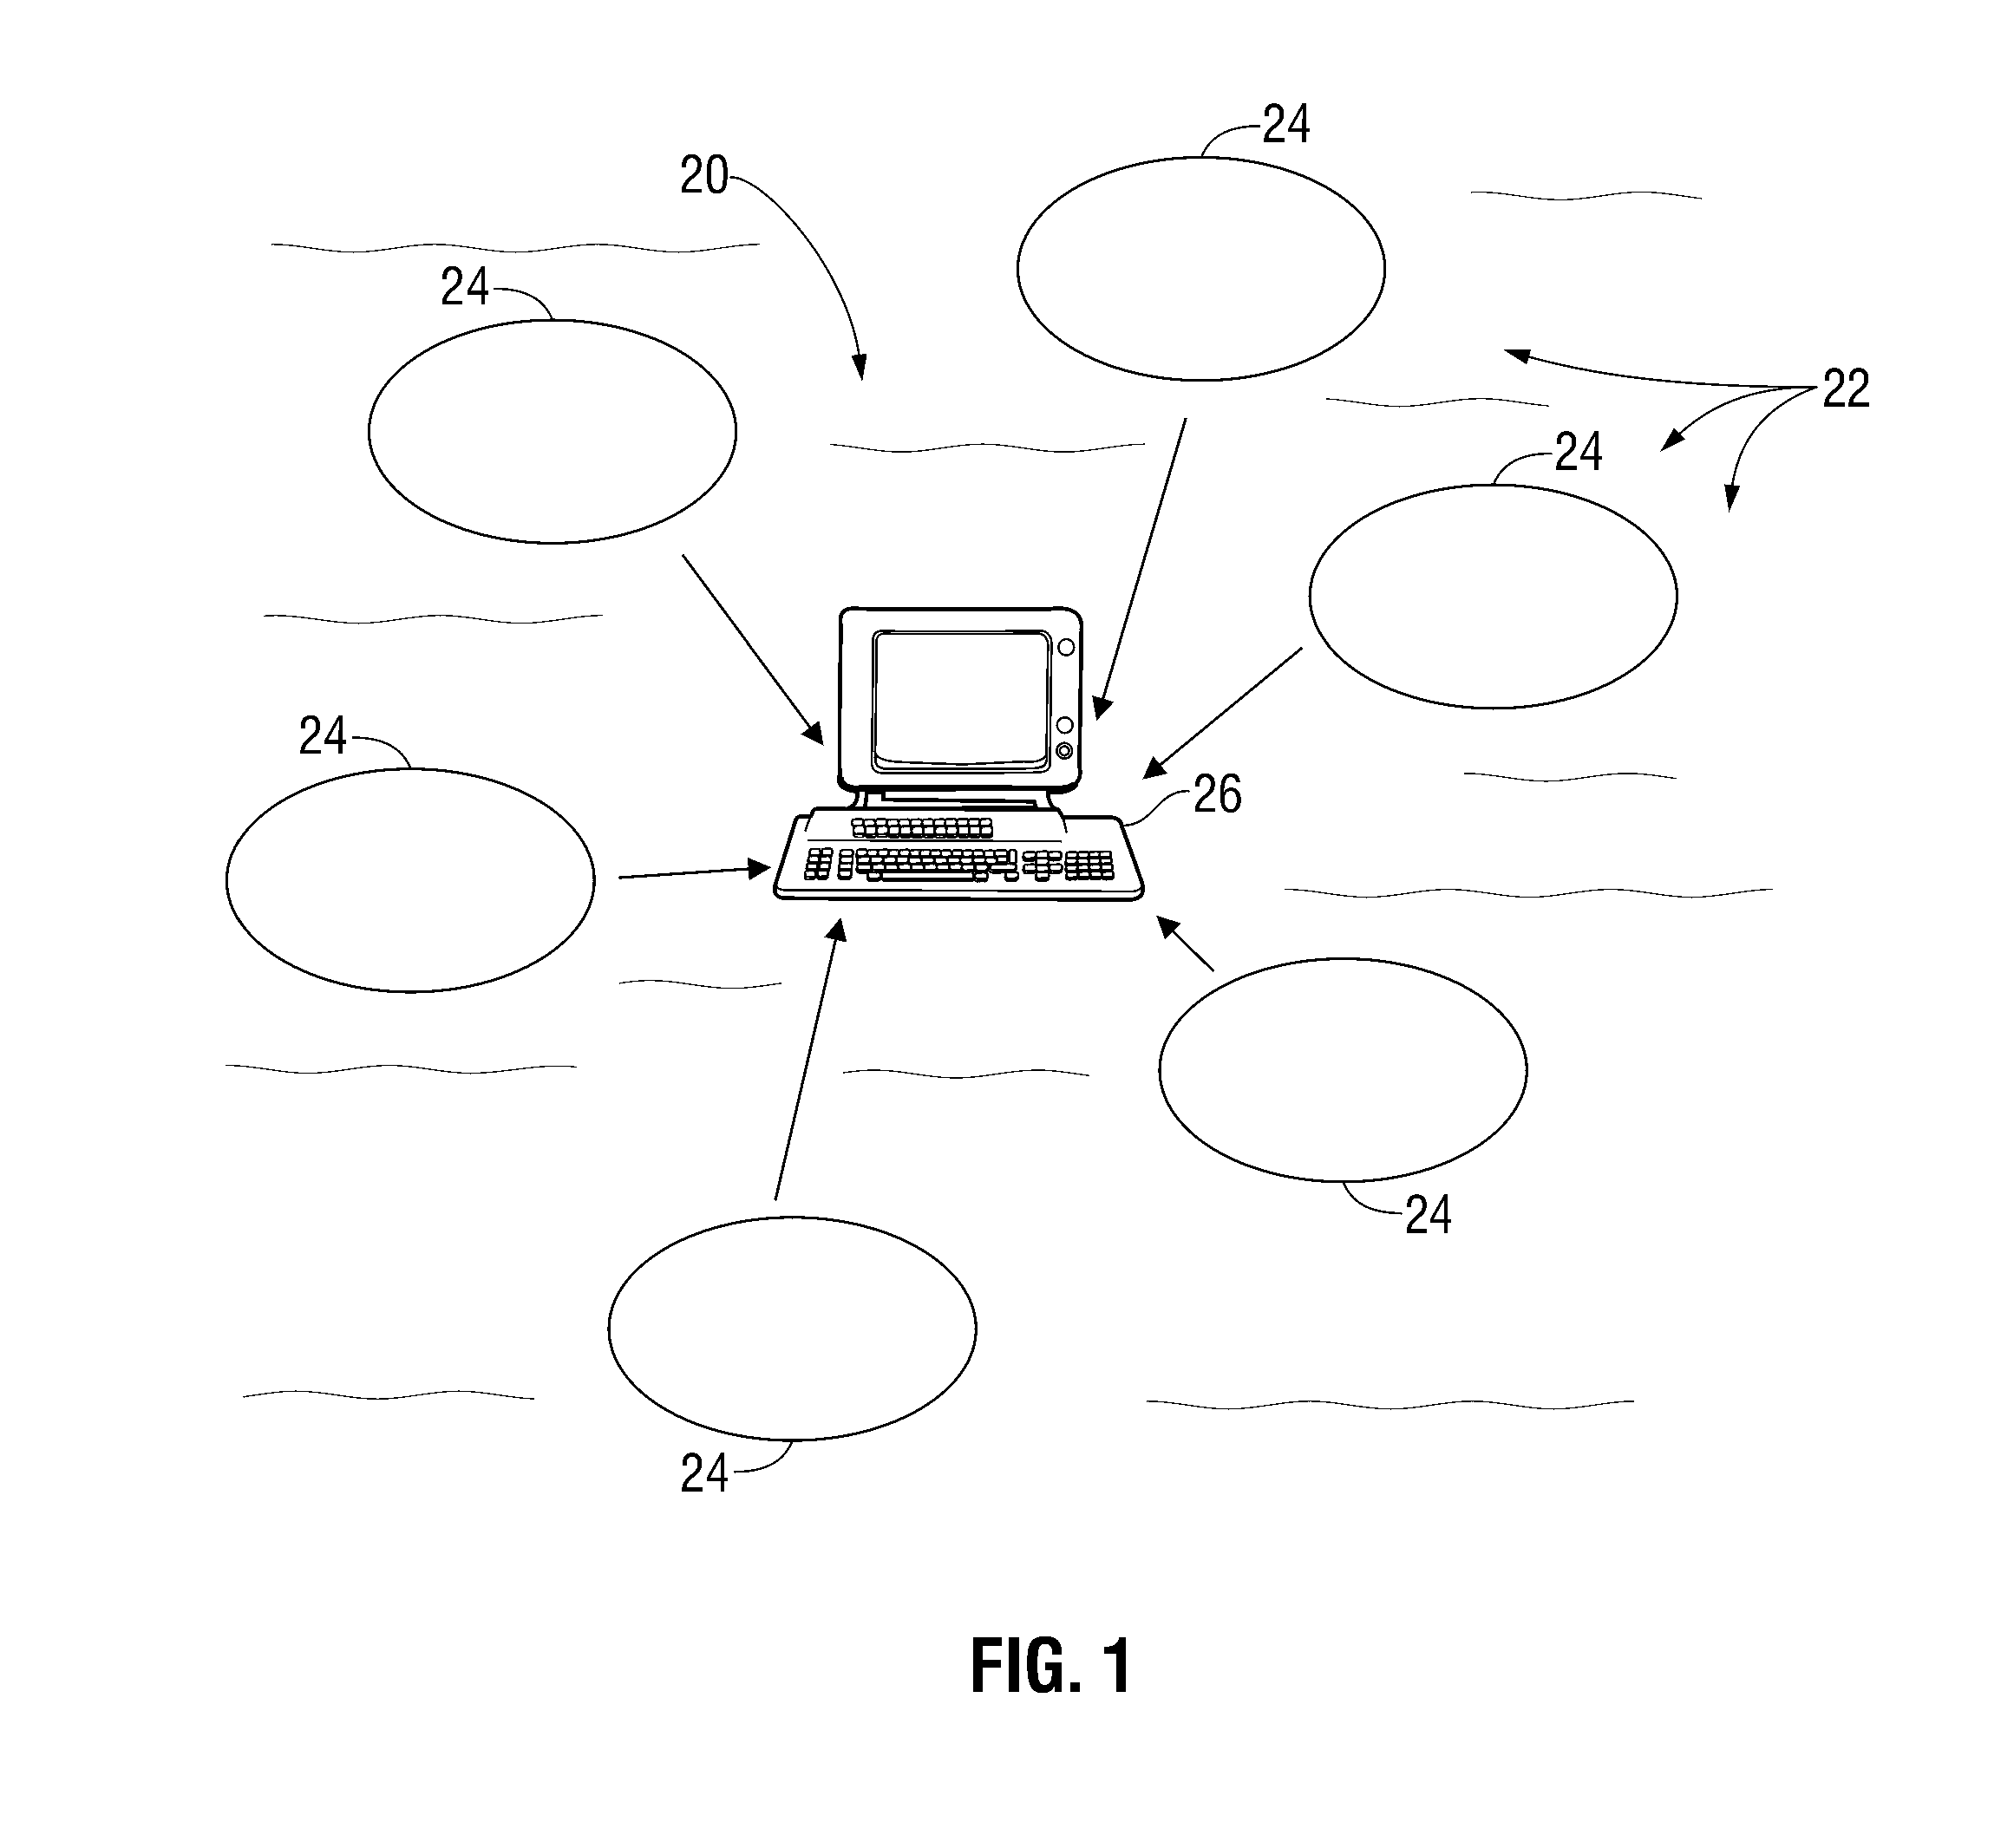 System and method for selecting candidates from a family of candidates